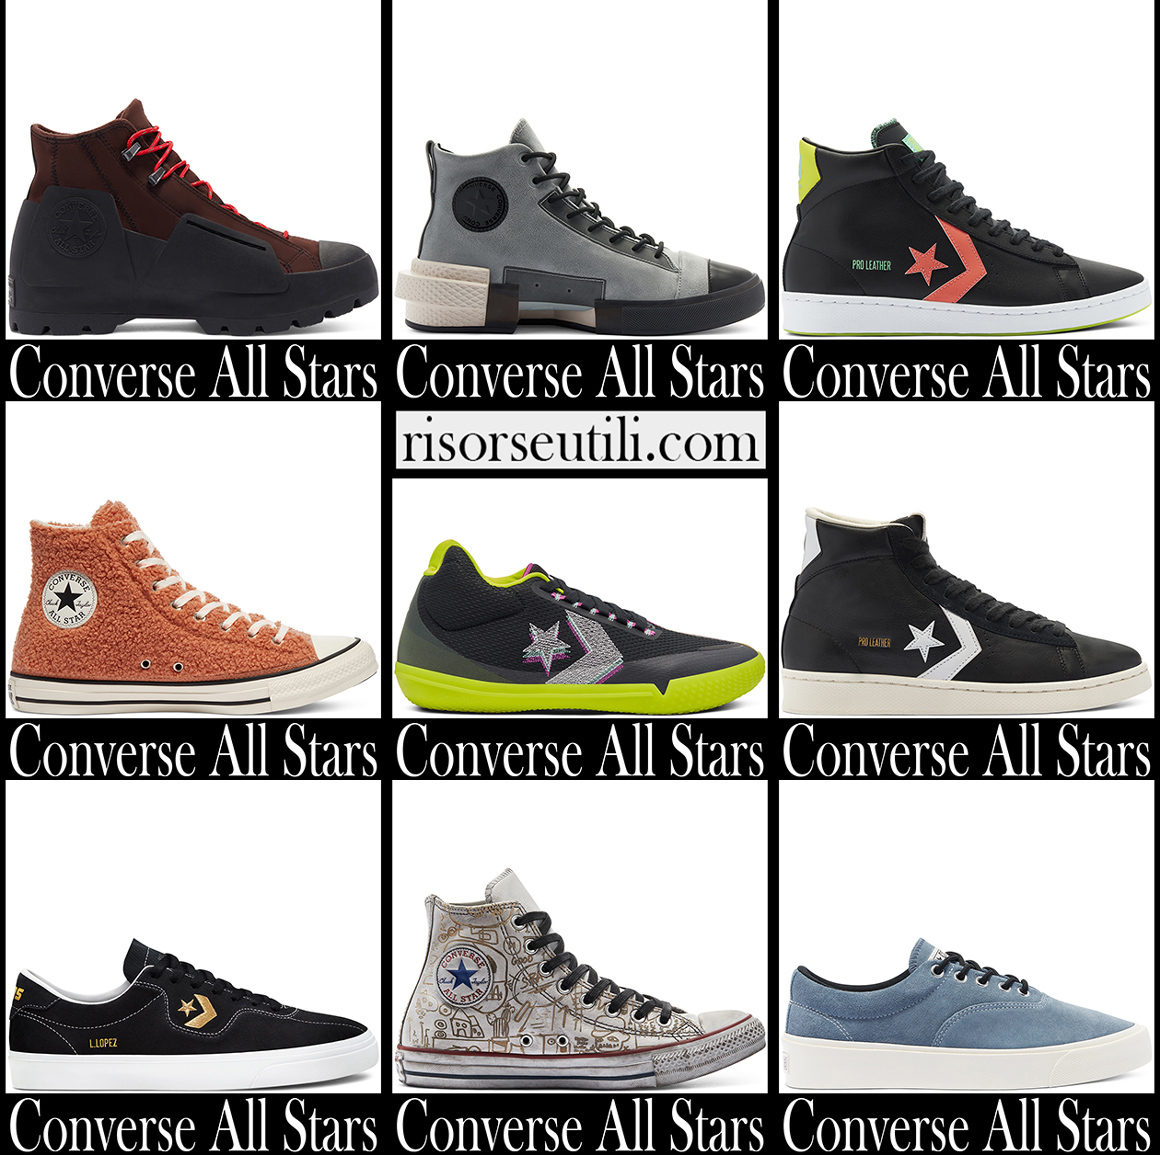 New arrivals Converse sneakers 2021 men's All Stars